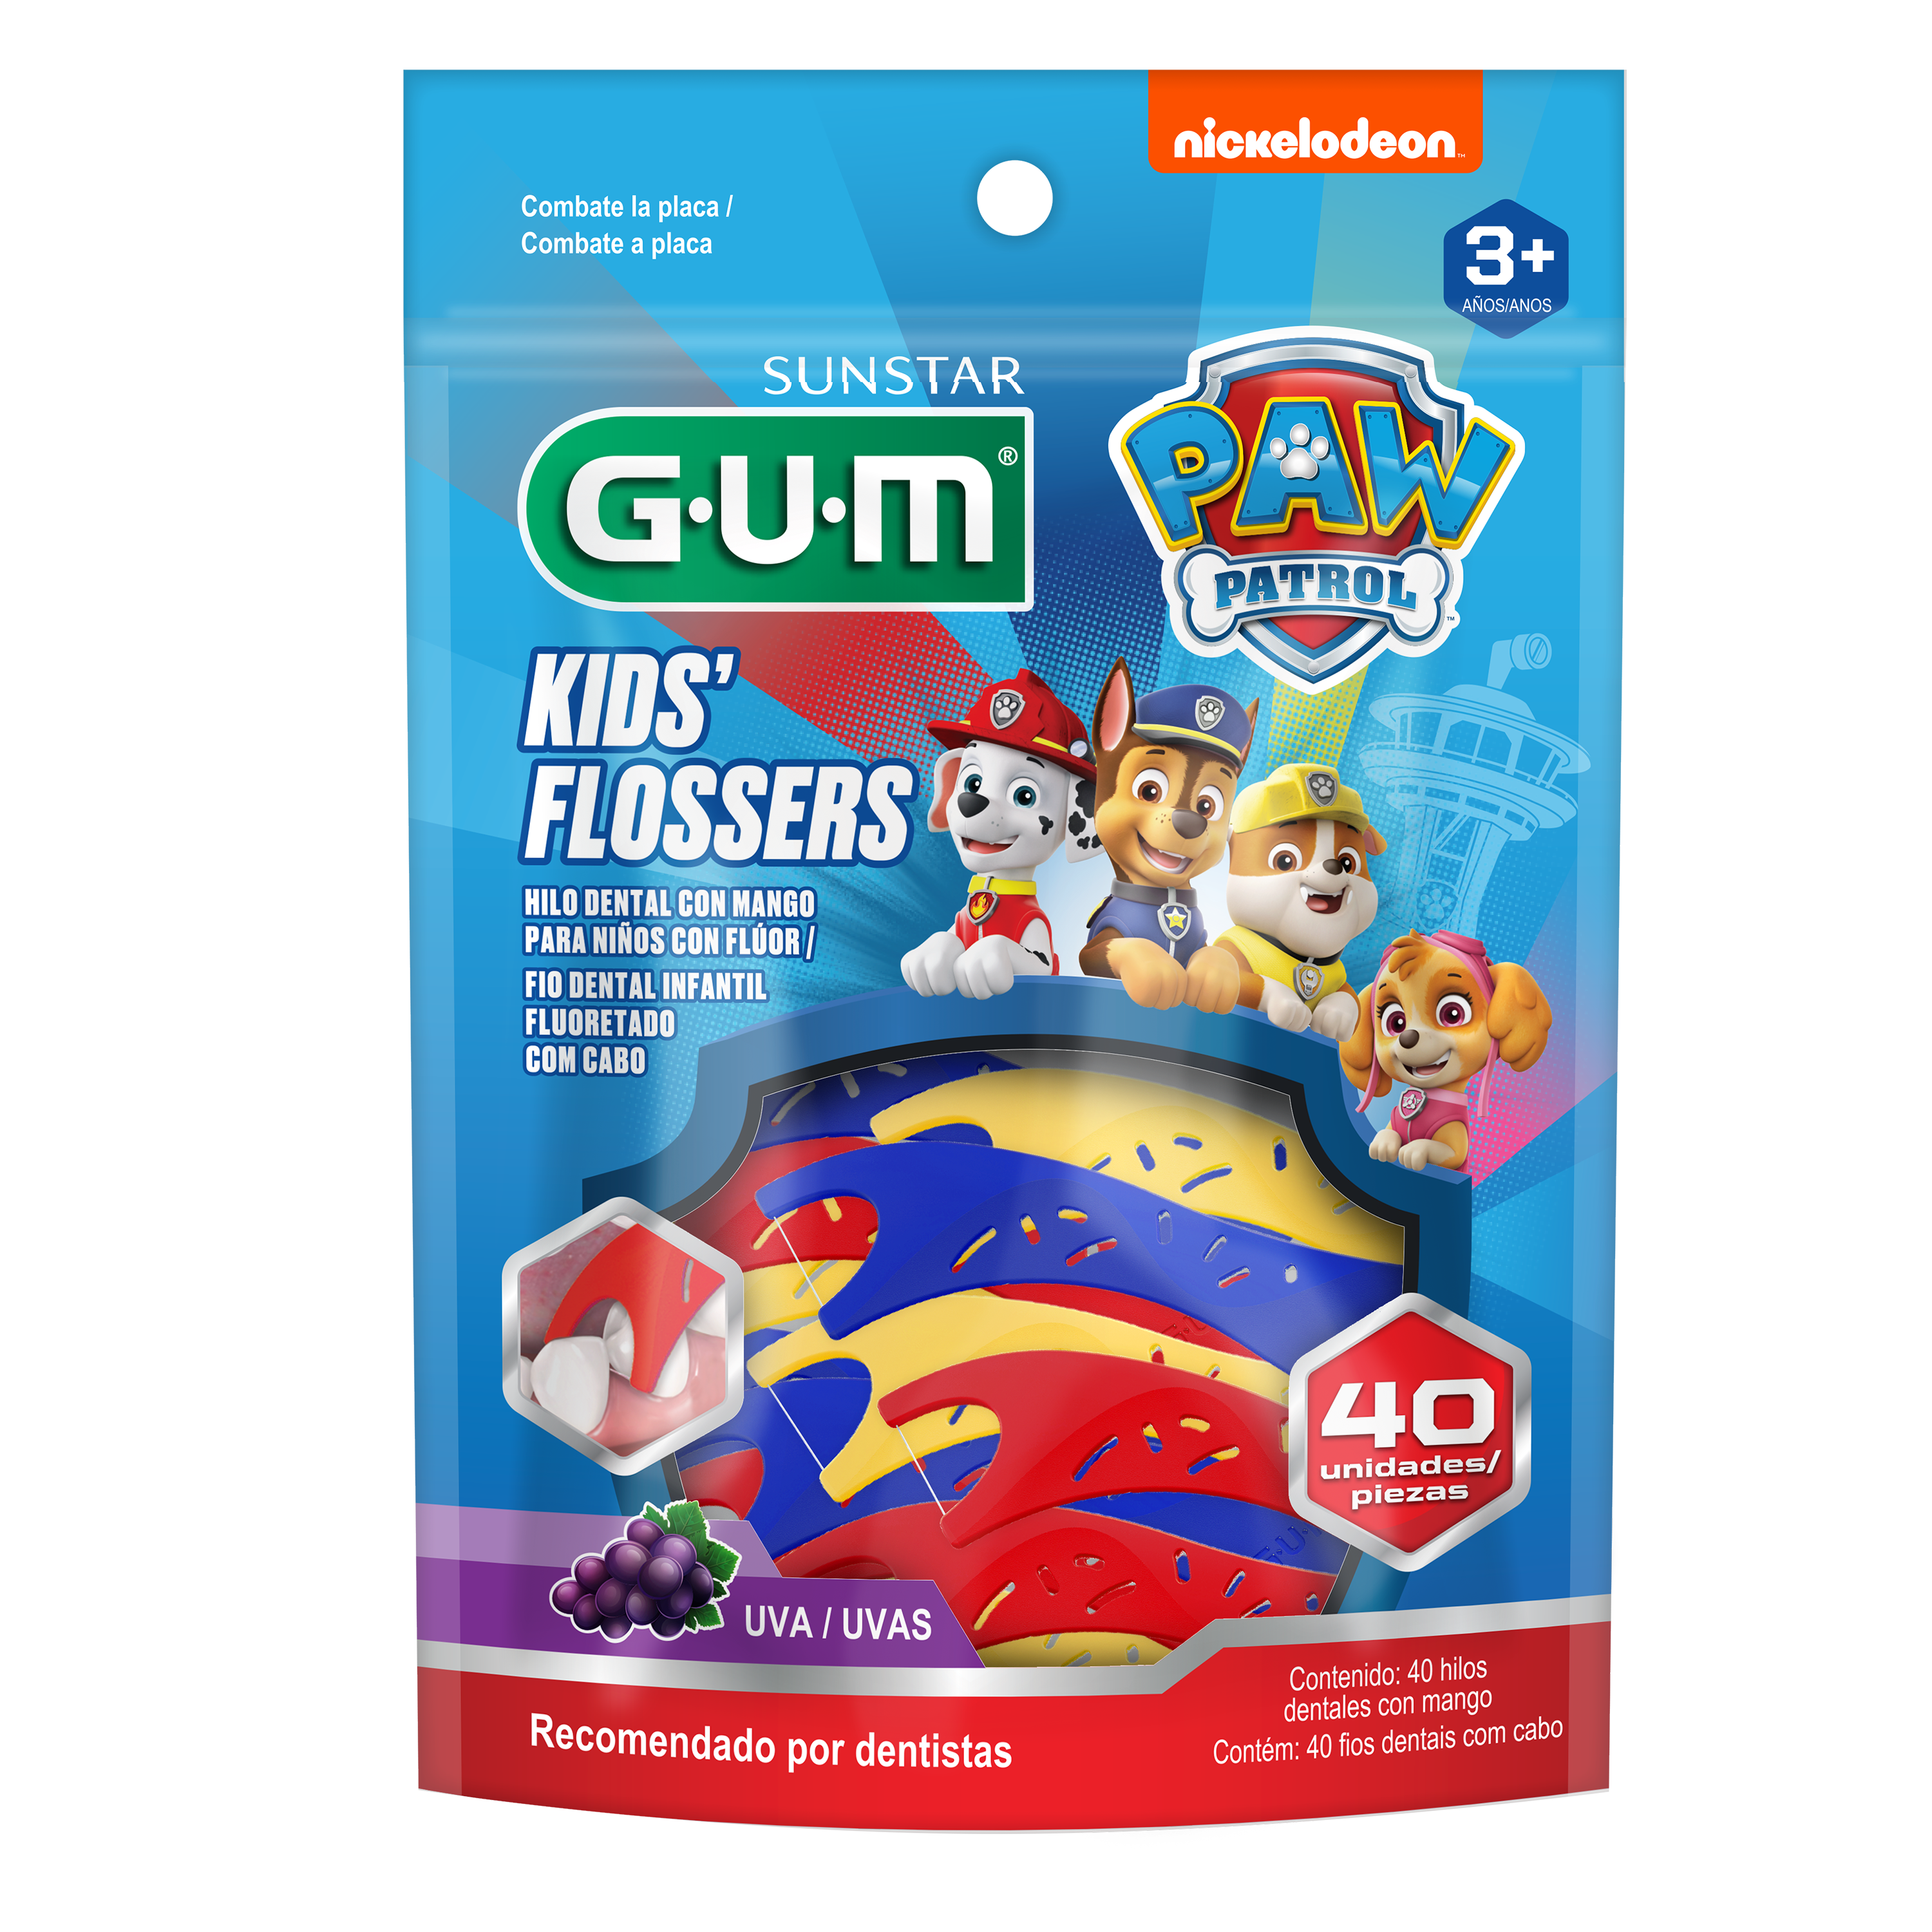 875PPY-Product-Packaging-Flossers-PAWPatrol-front-40ct.png